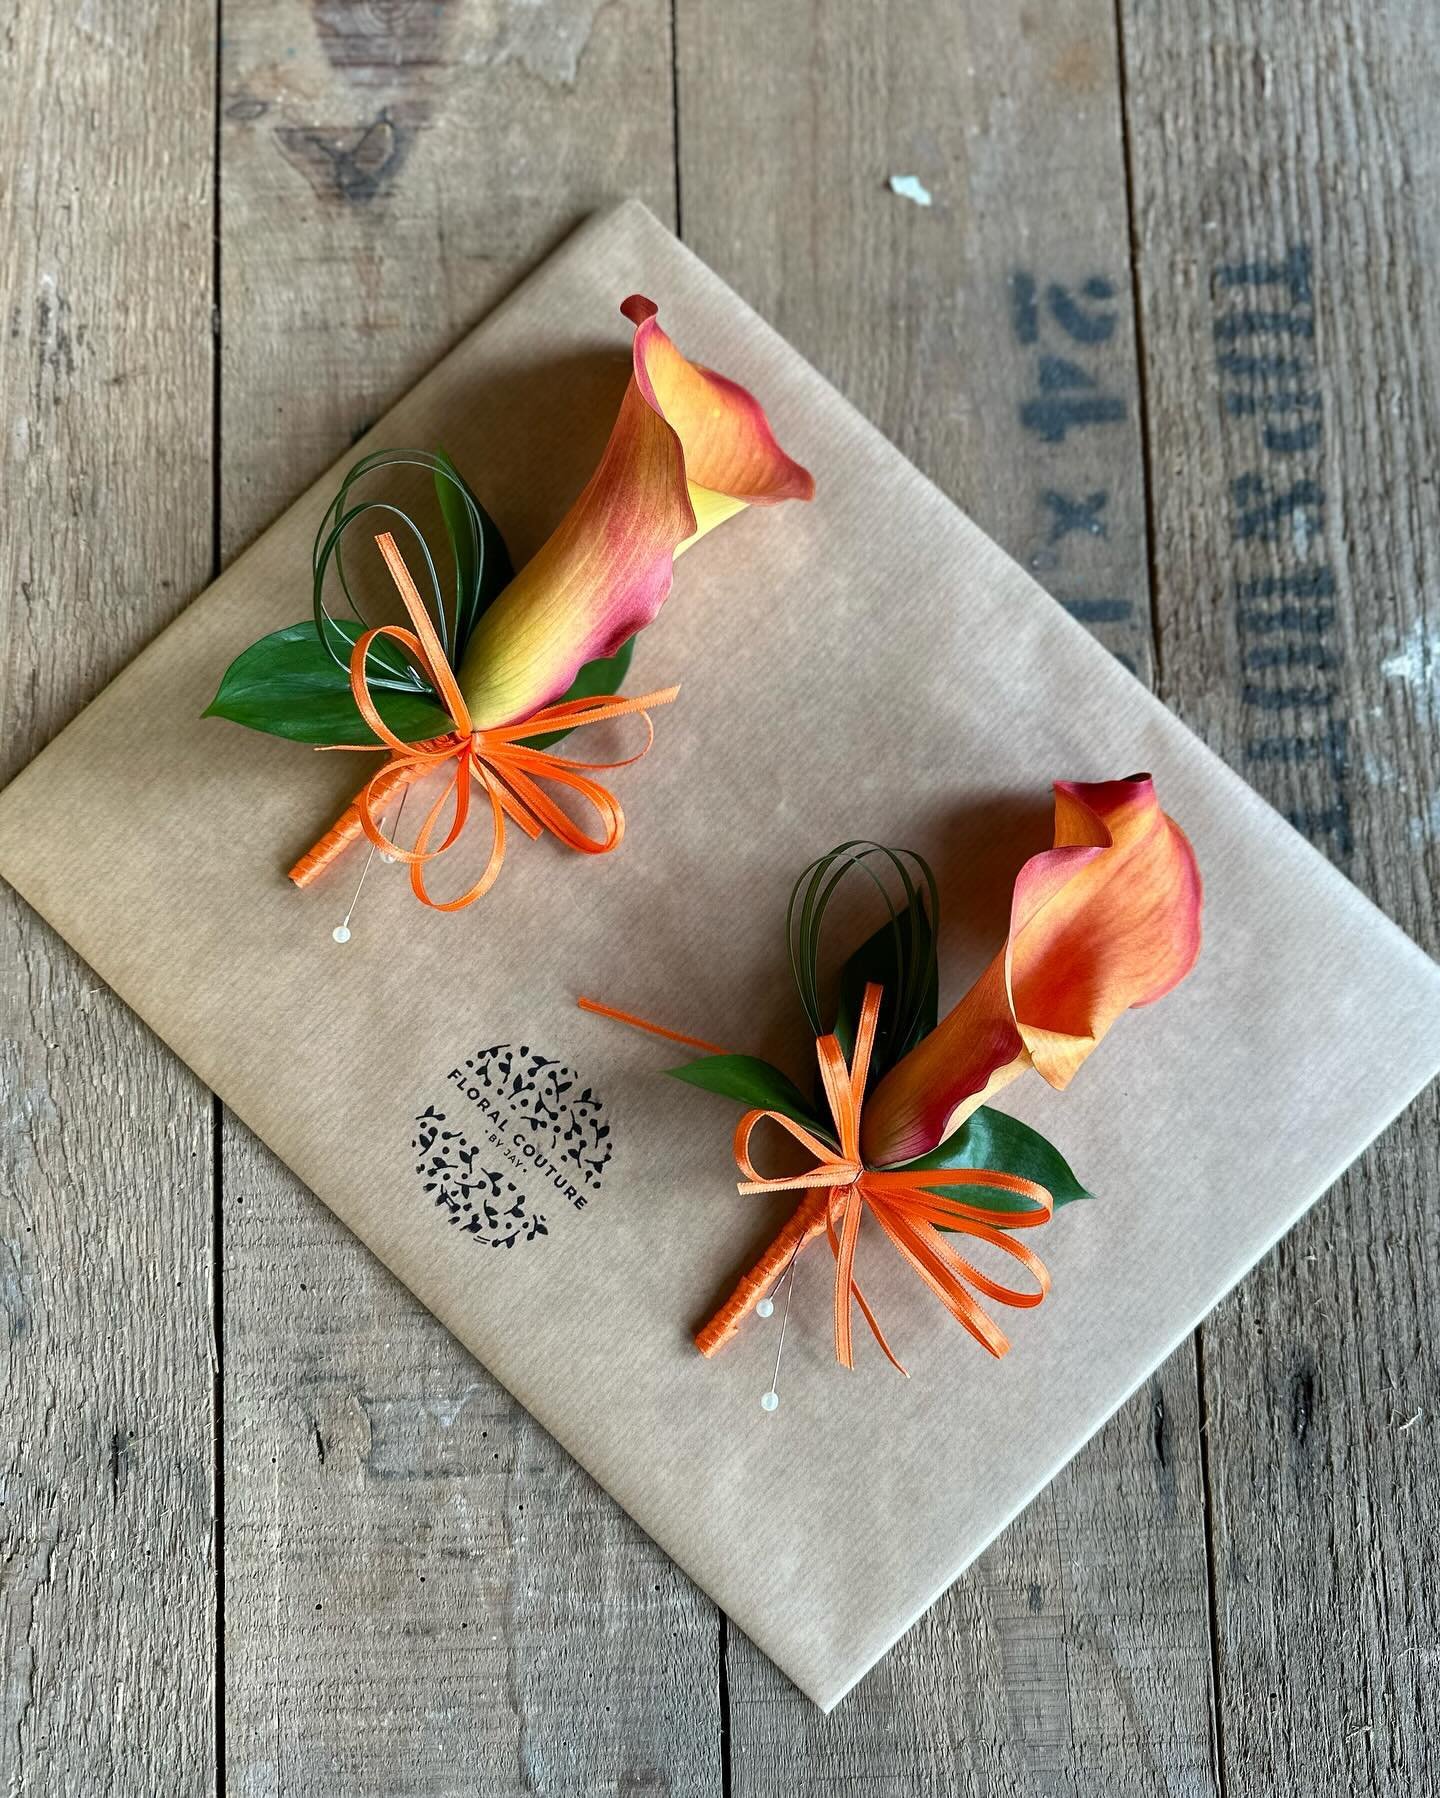 🍊ORANGE YOU GLAD TO SEE ME?🍊

Love the zesty burst of orange these buttonholes are giving 🫶

The perfect pair 🧡🧡